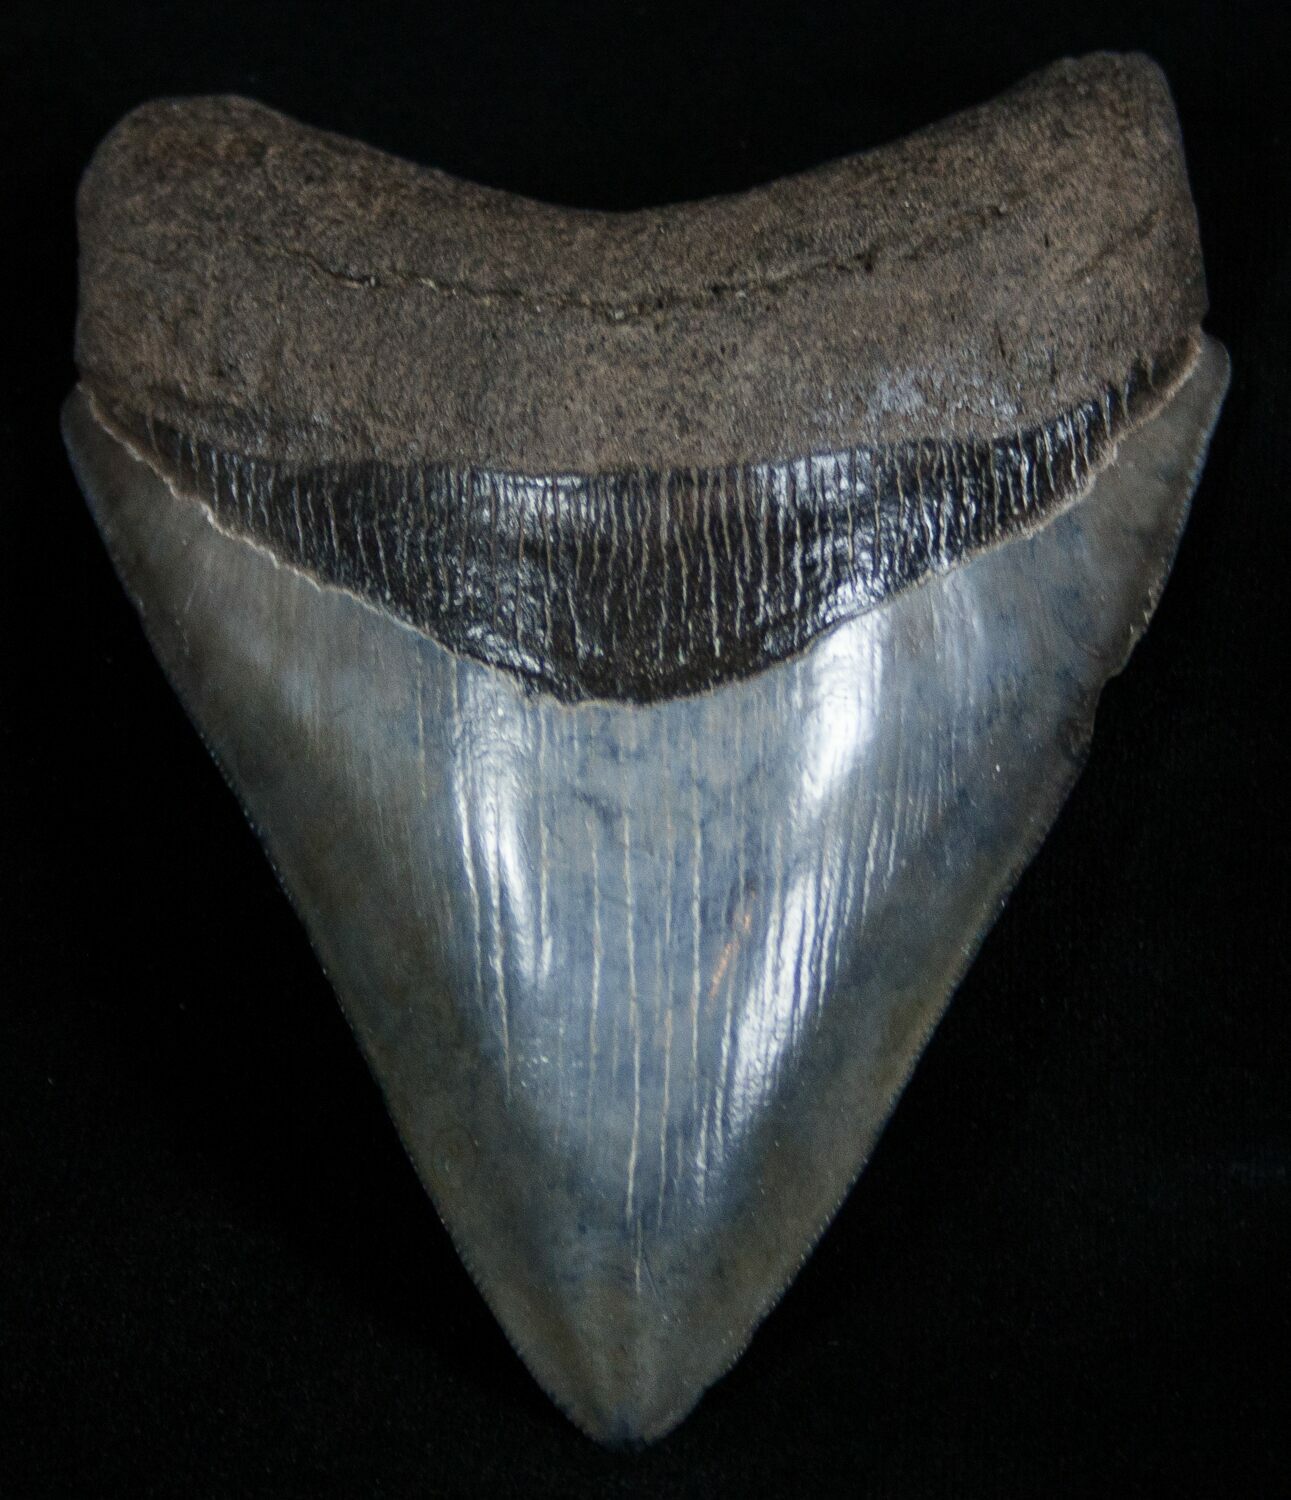 Collector Quality Florida Megalodon Tooth - 4.45 Inches For Sale (#1940